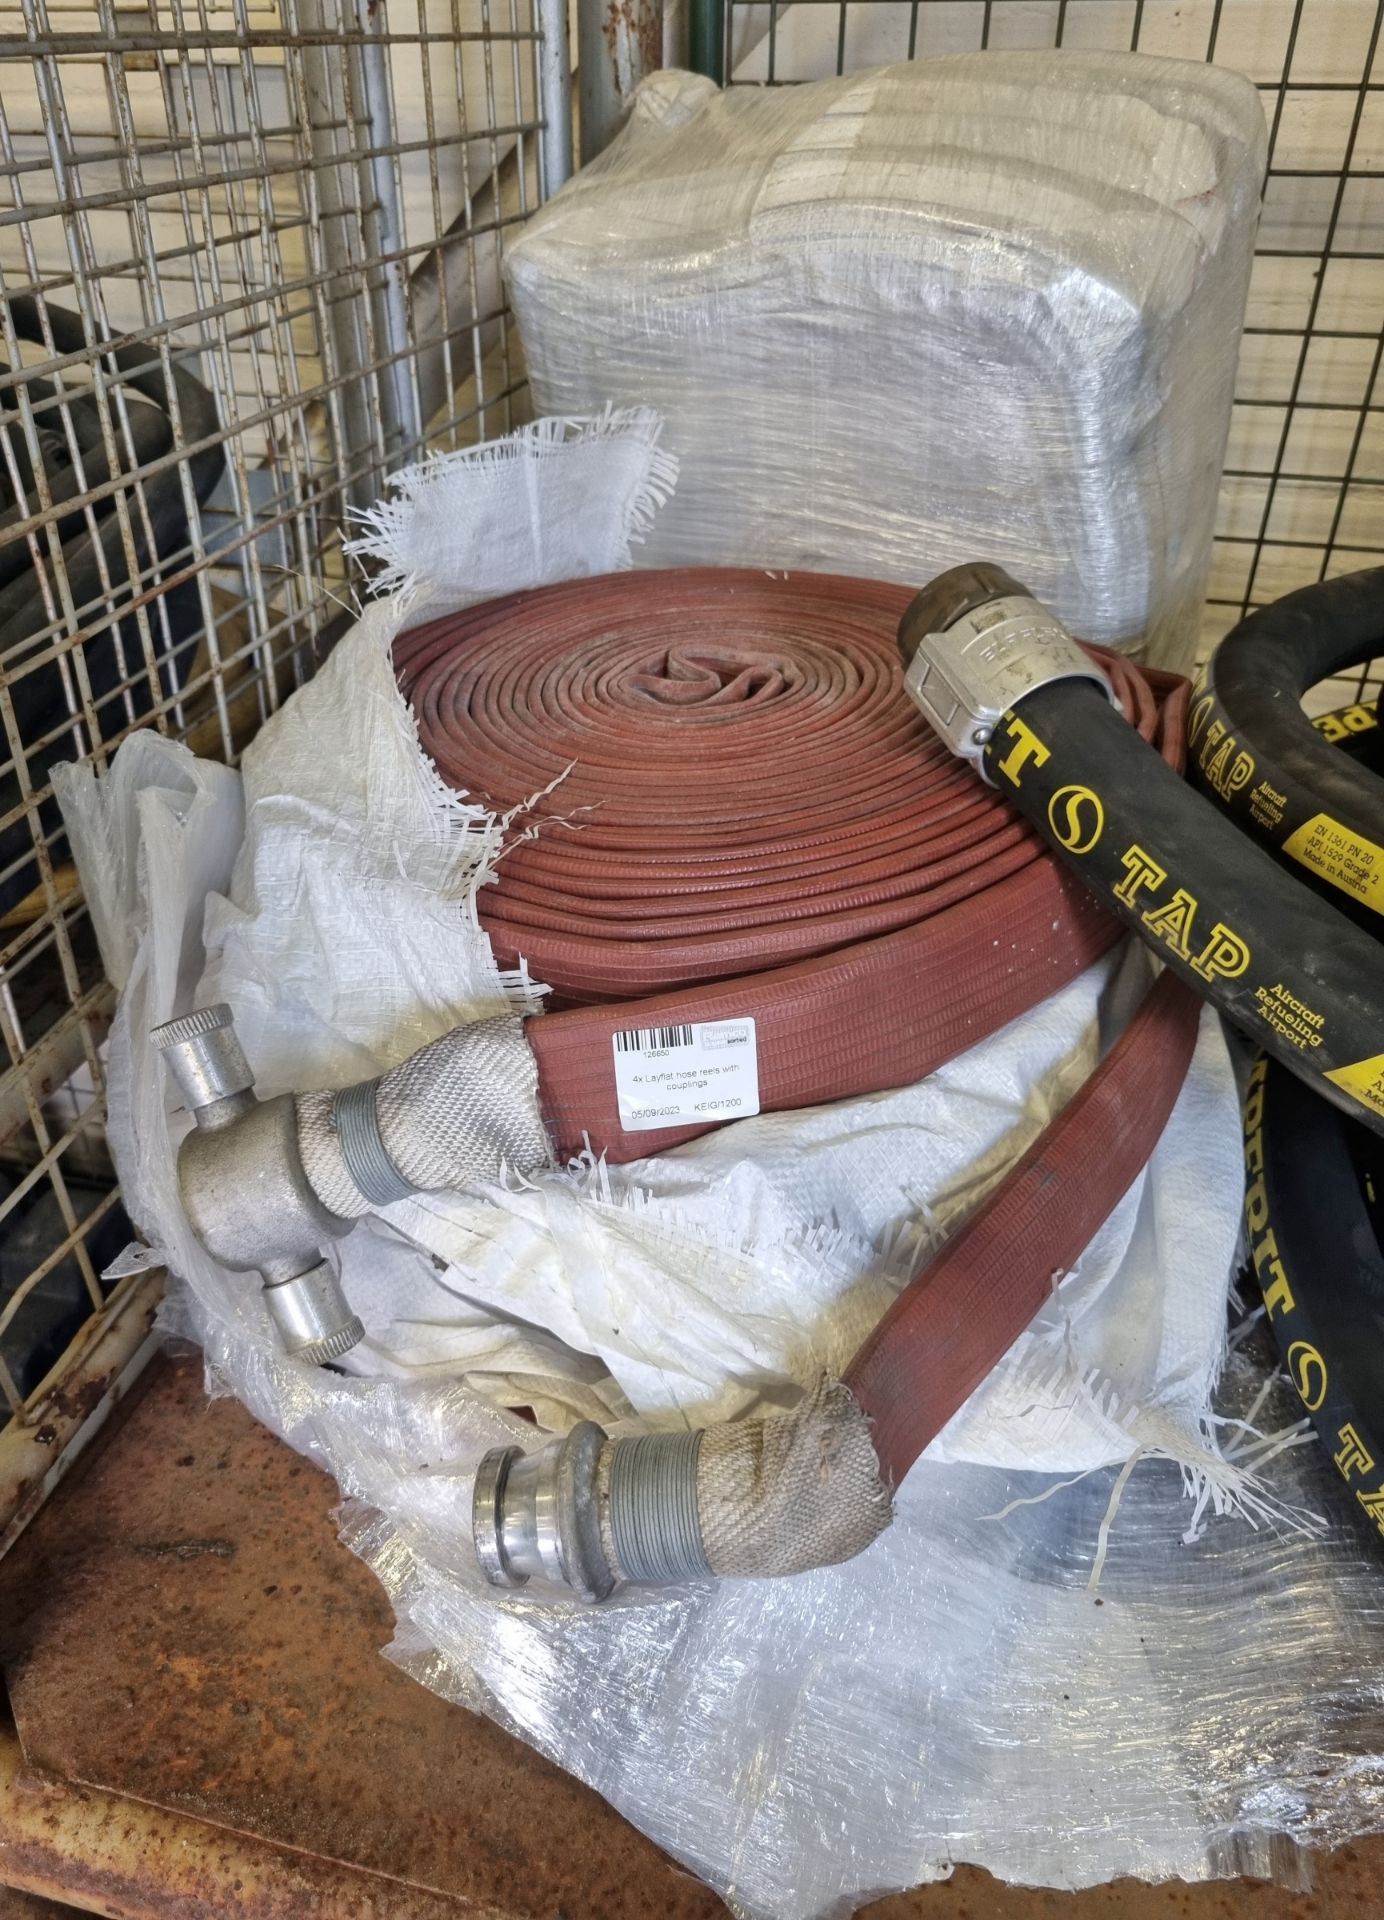 4x Layflat hose reels with couplings, 5x Semperit refueling hoses - approx length 3.8m - Image 3 of 6